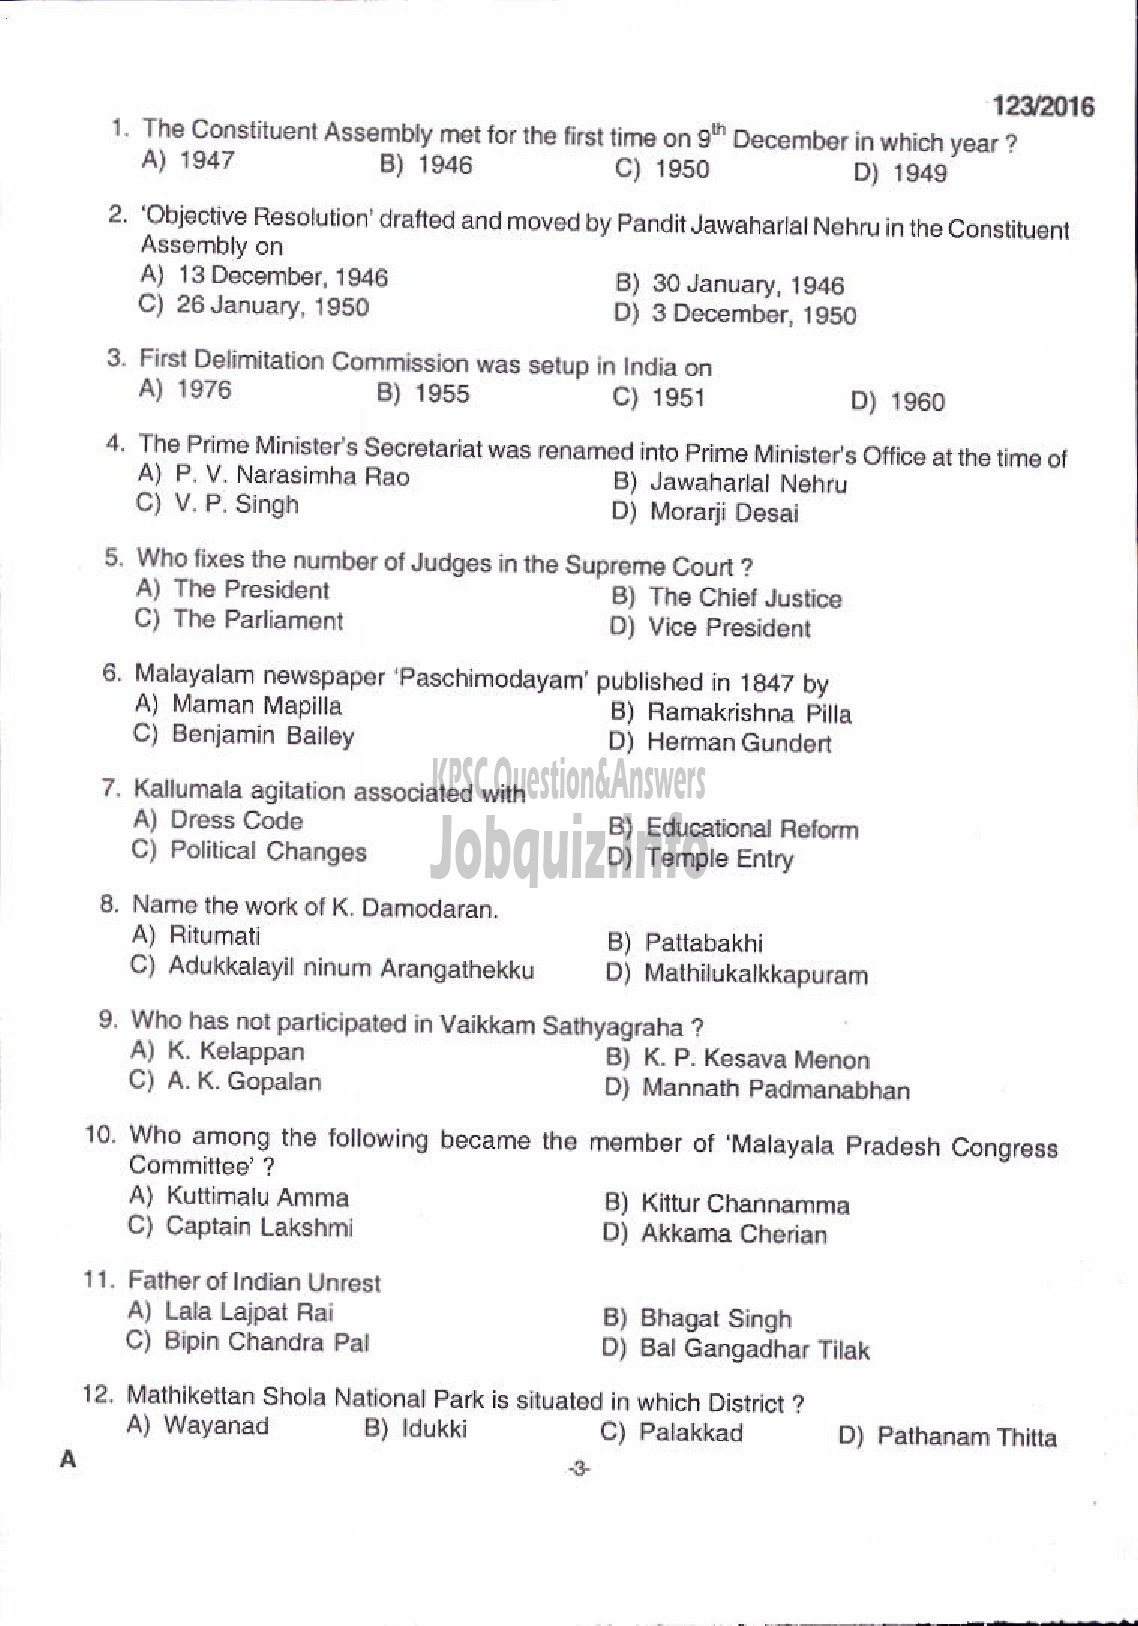 Kerala PSC Question Paper - ASSISTANT PROFESSOR COMPUTER SCIENCE AND ENGINEERING TECHNICAL EDUCATION ENGINEERING DCOLLEGES-1